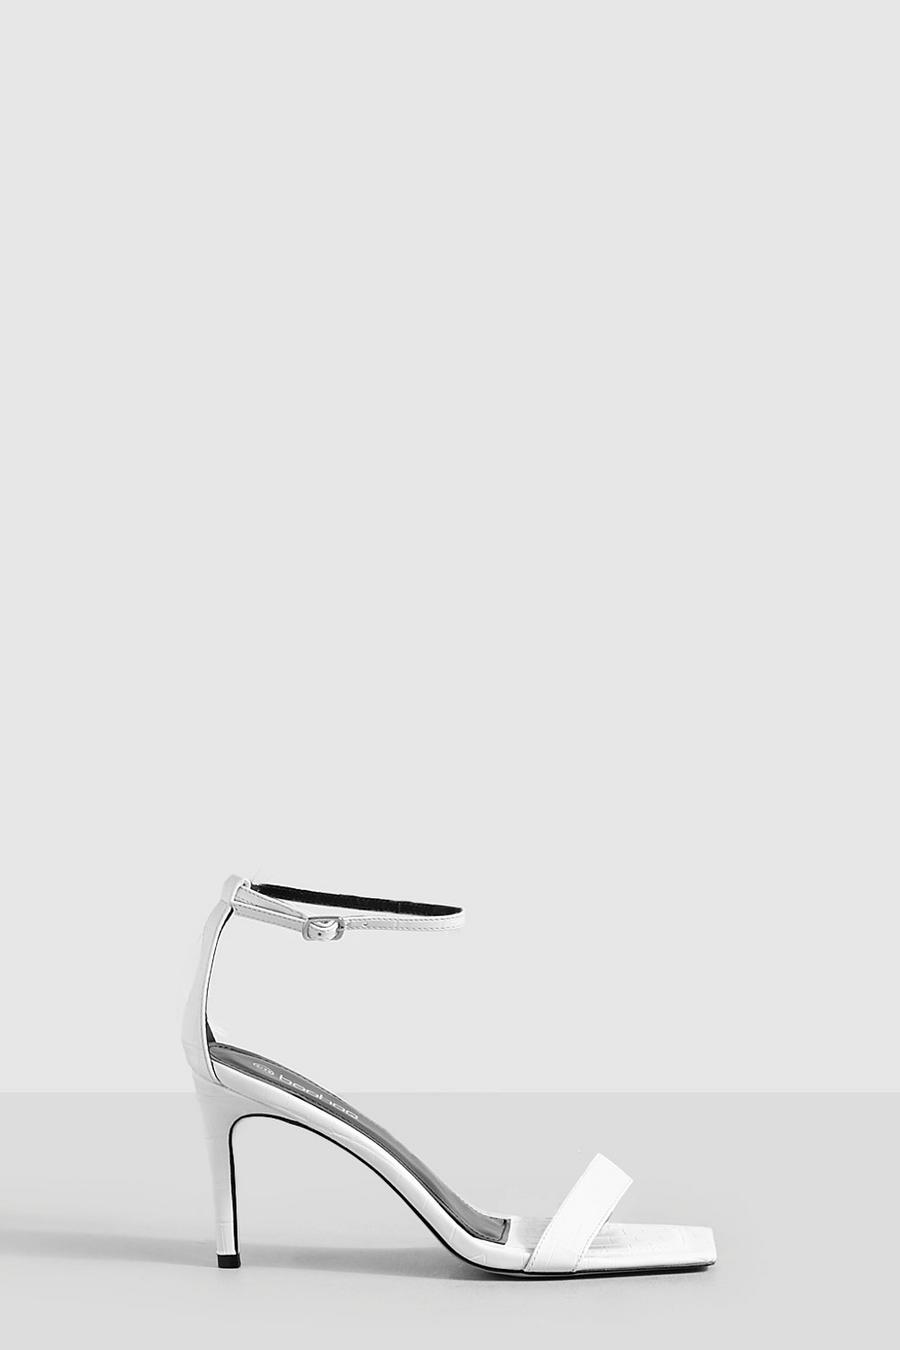 Loveliness White Ankle Strap Heels